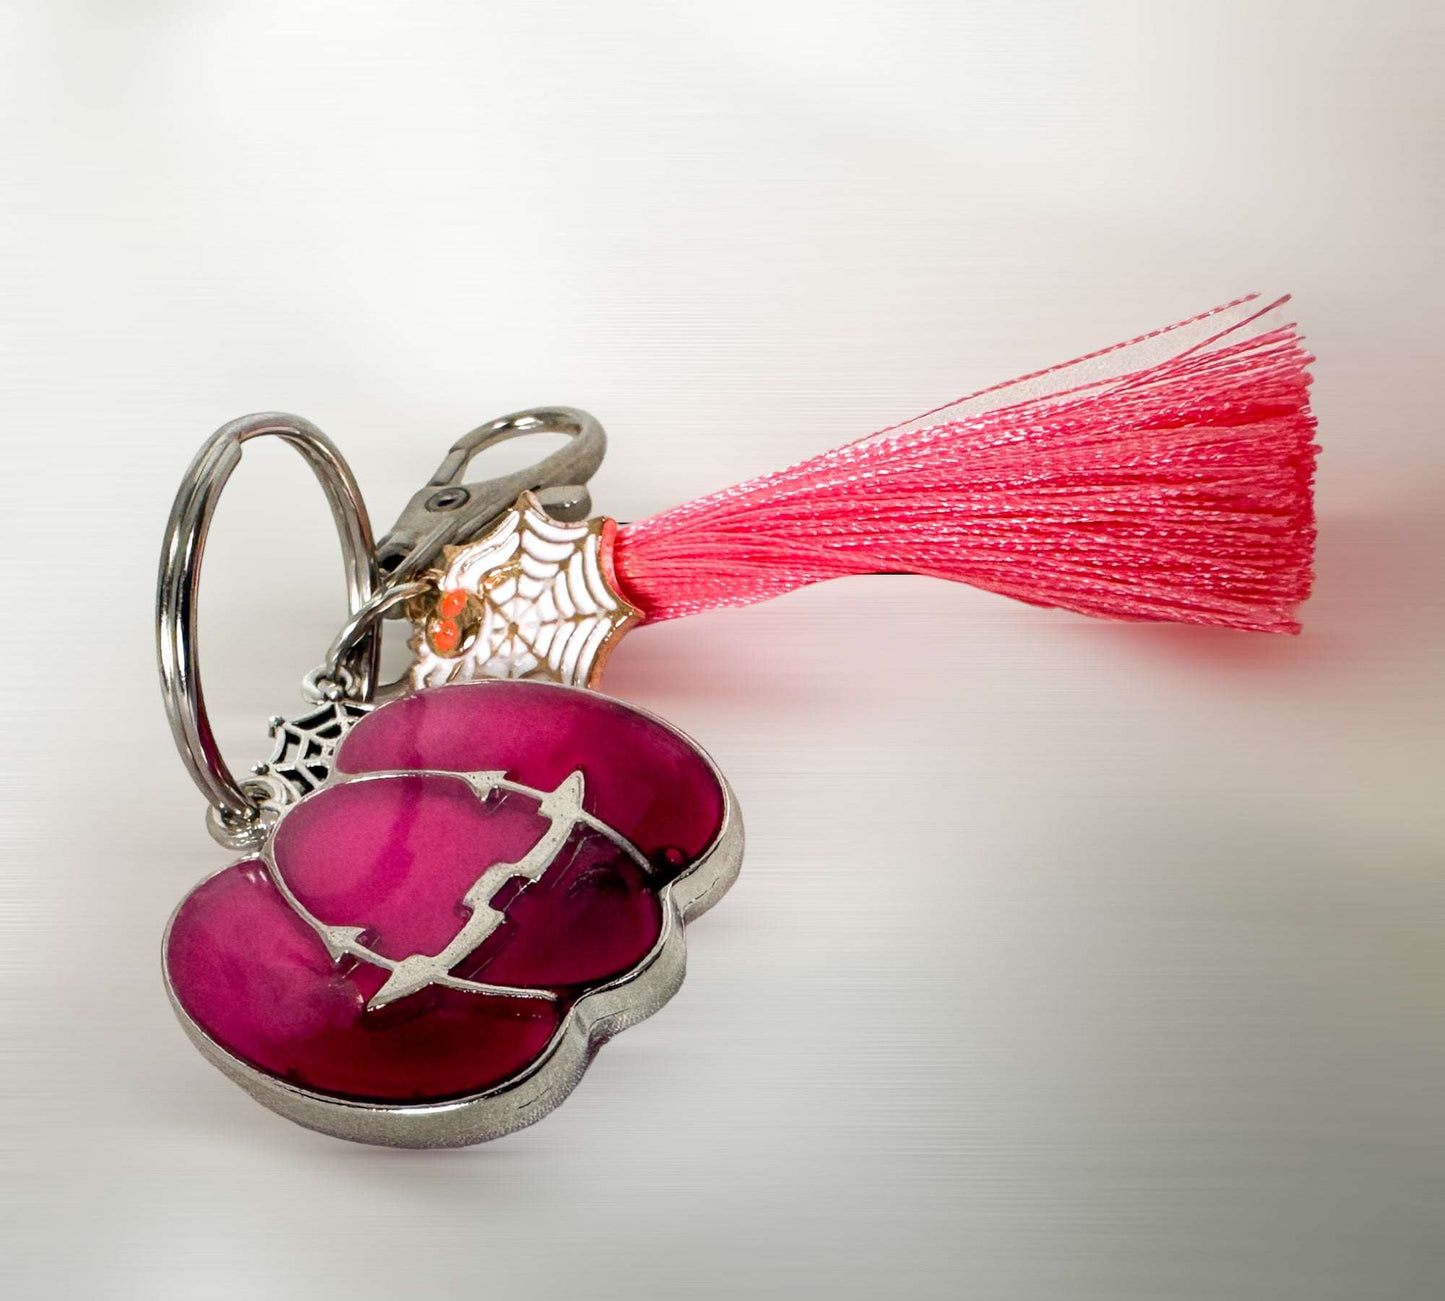 A Two Tone Pink Glow in the Dark Pumpkin shaped Keychain with a pink tassel and Halloween charms